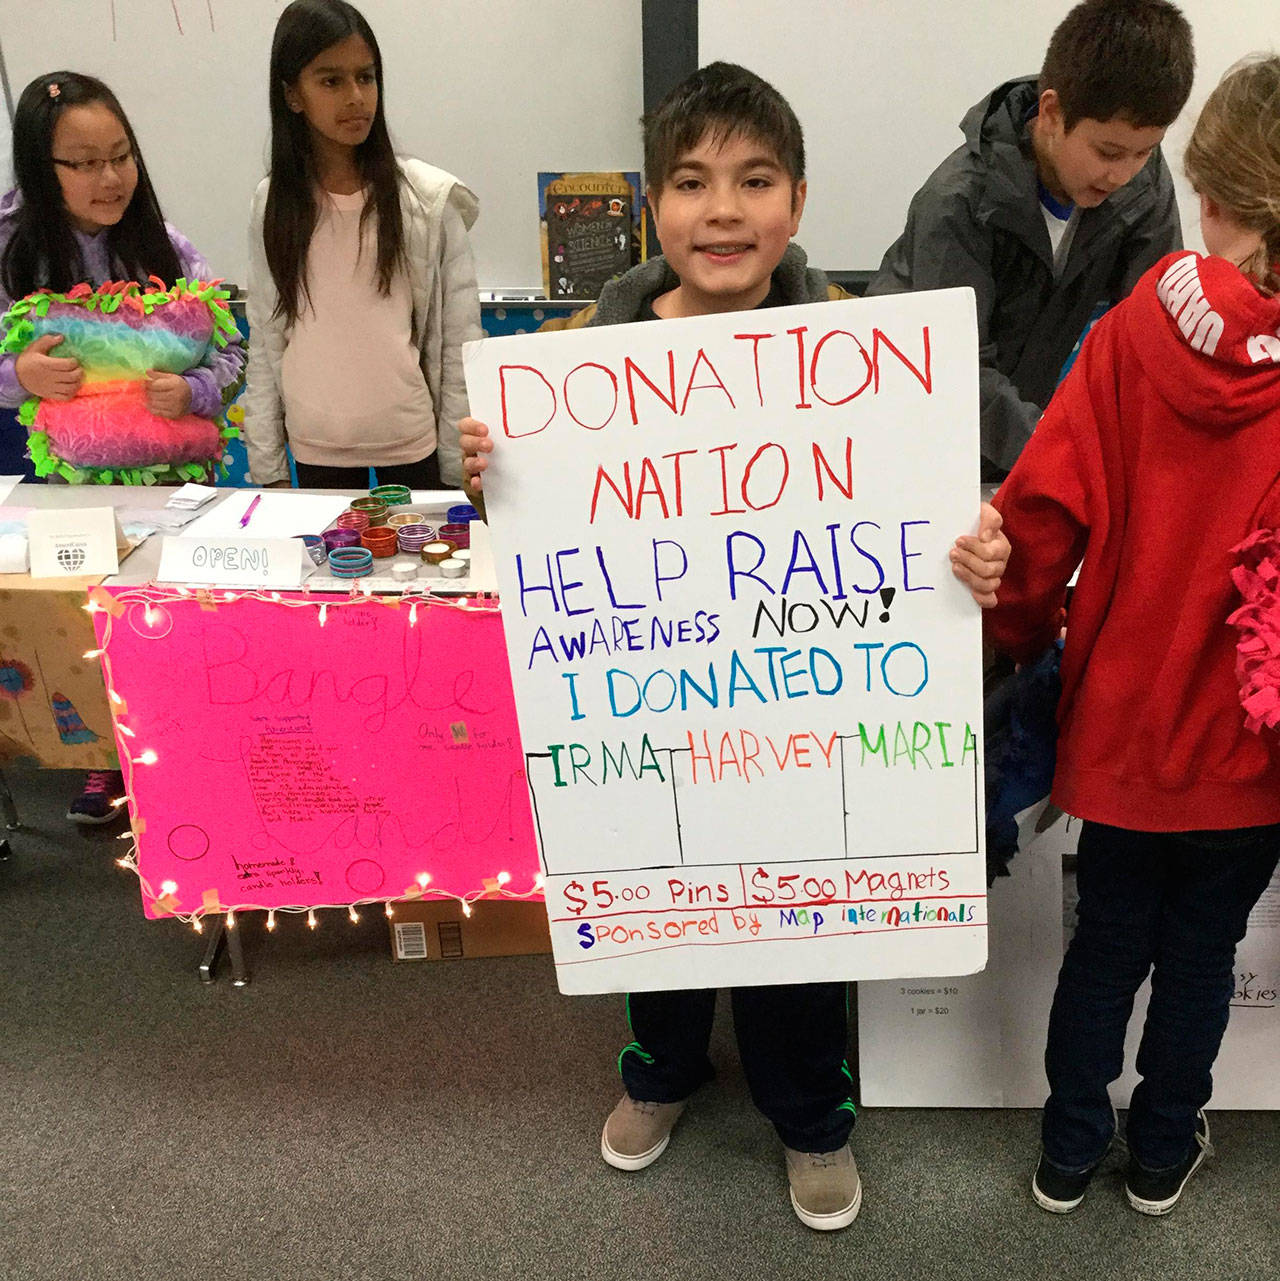 West Mercer students raise funds for the relief efforts of Hurricanes Harvey, Irma and Maria. Photo courtesy of Craig Degginger/Mercer Island School District